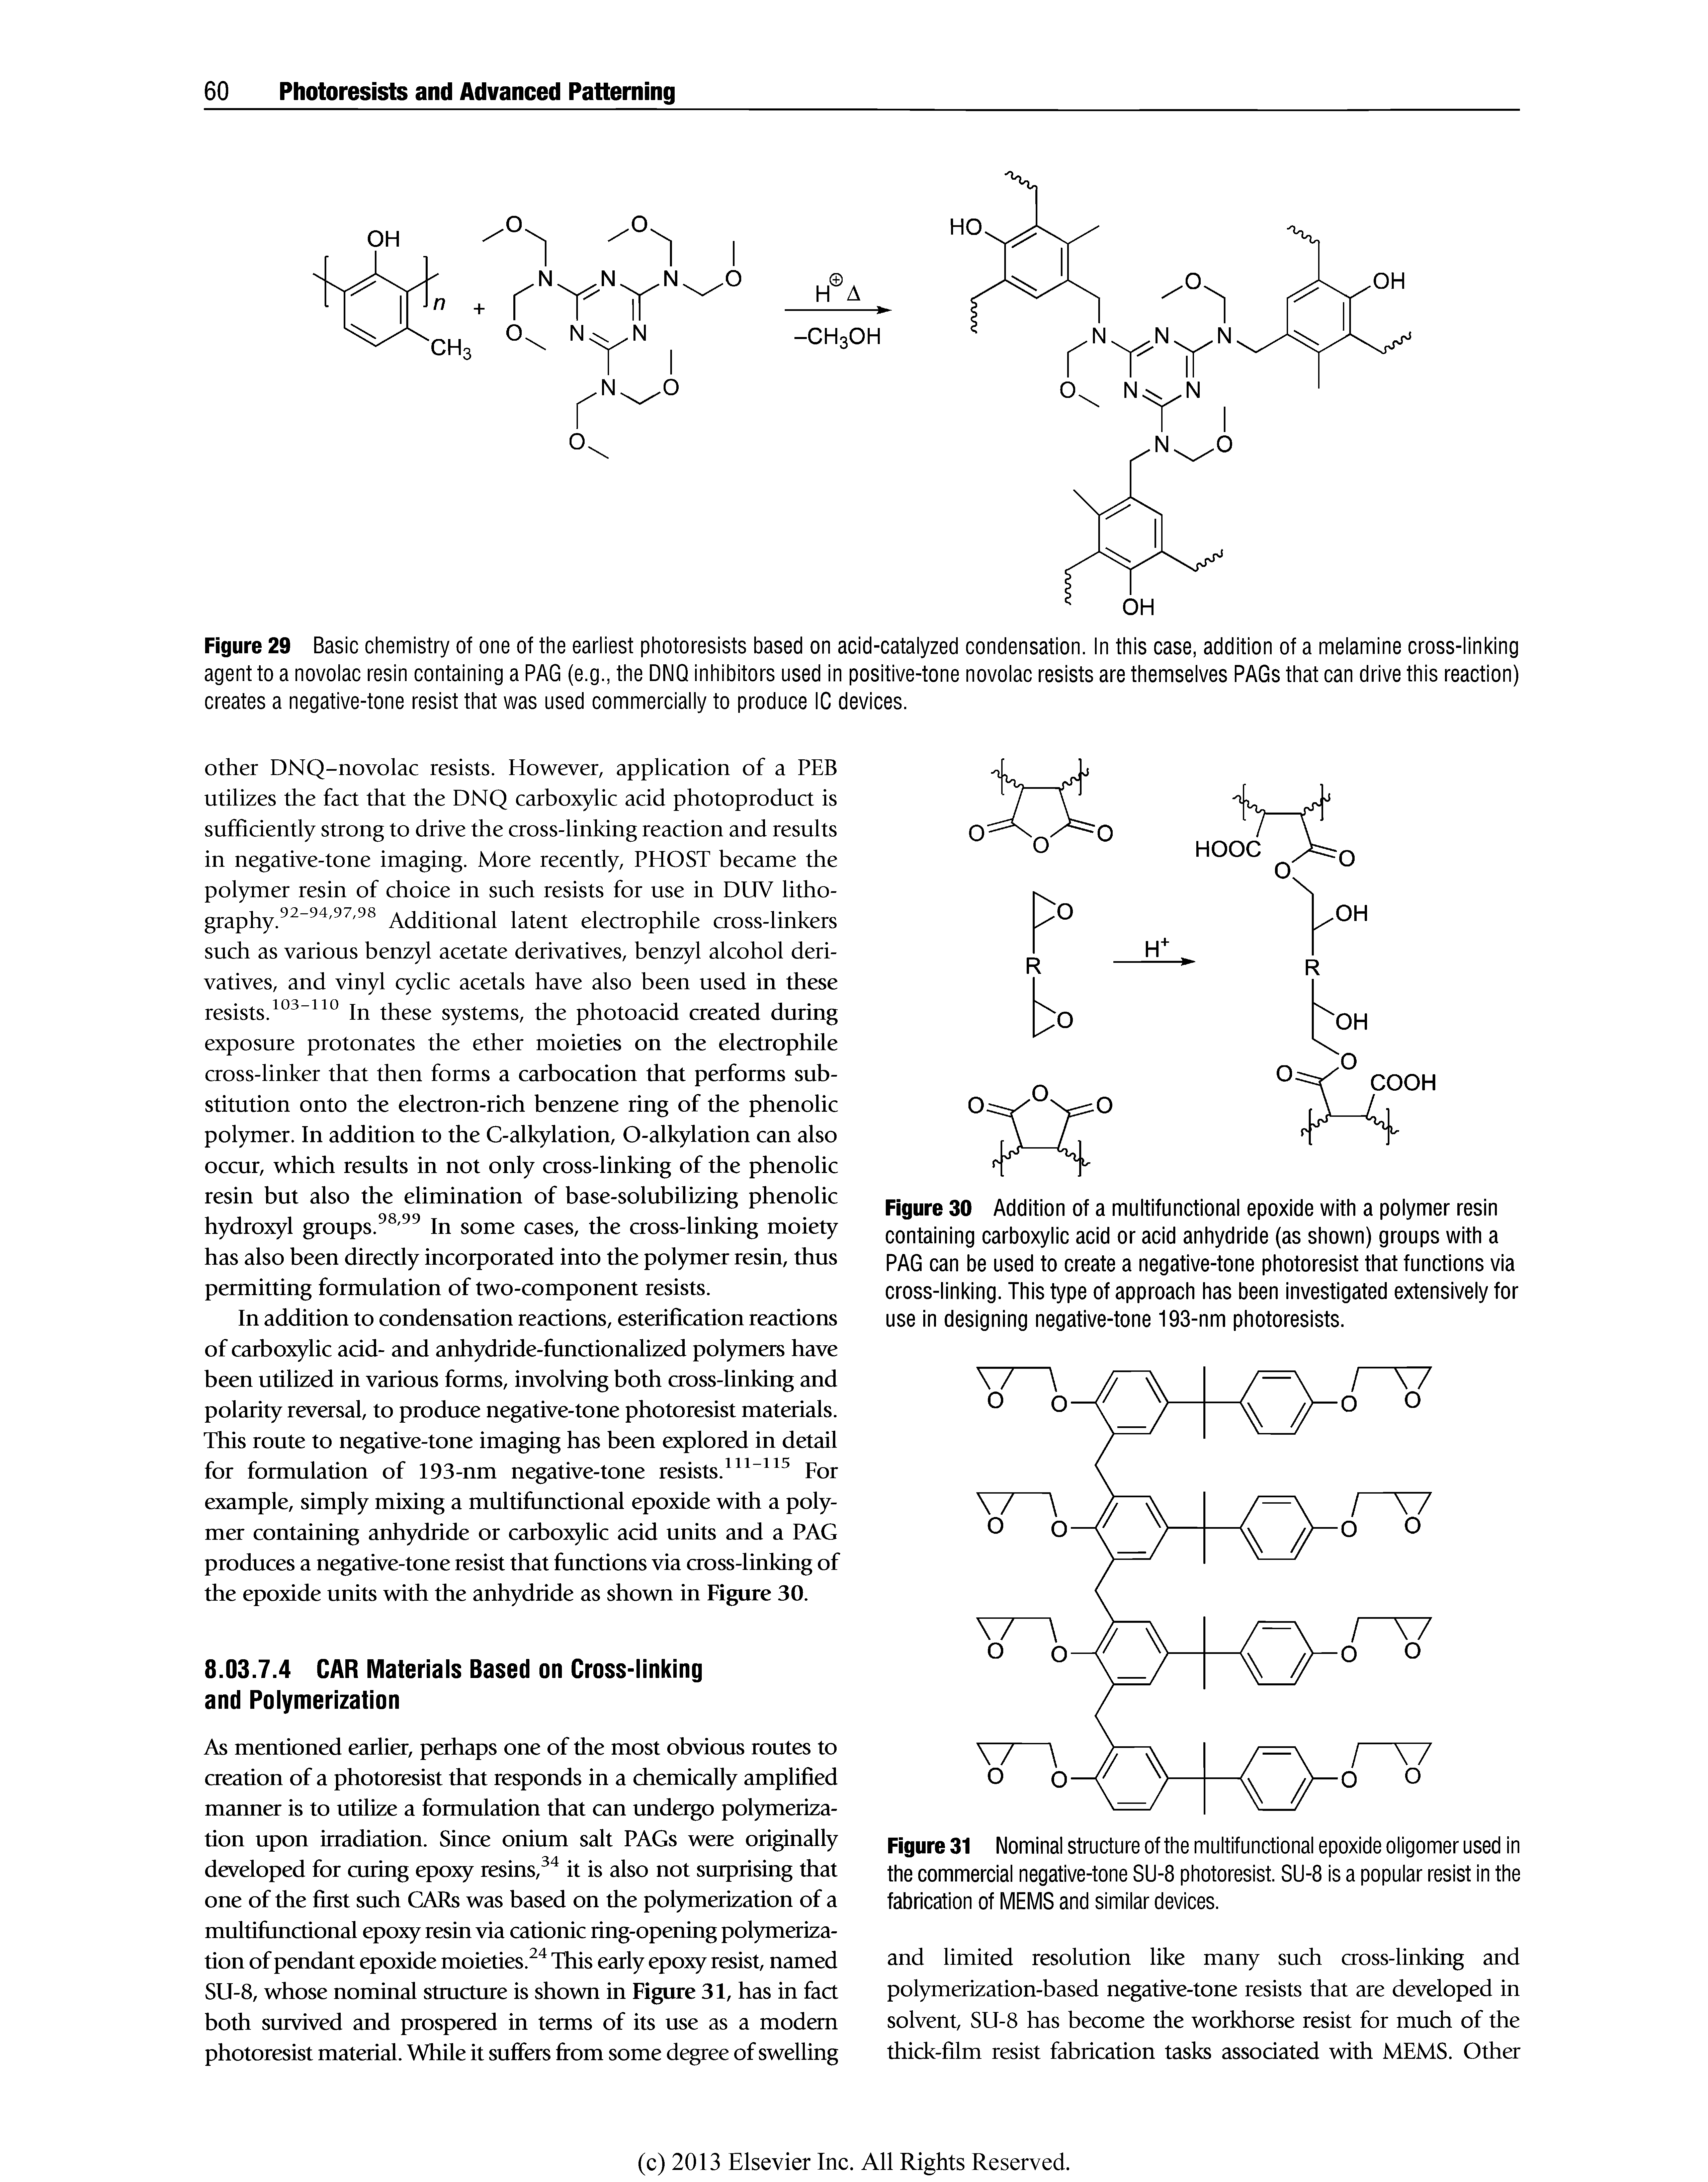 Figure 31 Nominal structure of the multifunctional epoxide oligomer used in the commercial negative-tone SU-8 photoresist. SU-8 is a popular resist in the fabrication of MEMS and similar devices.